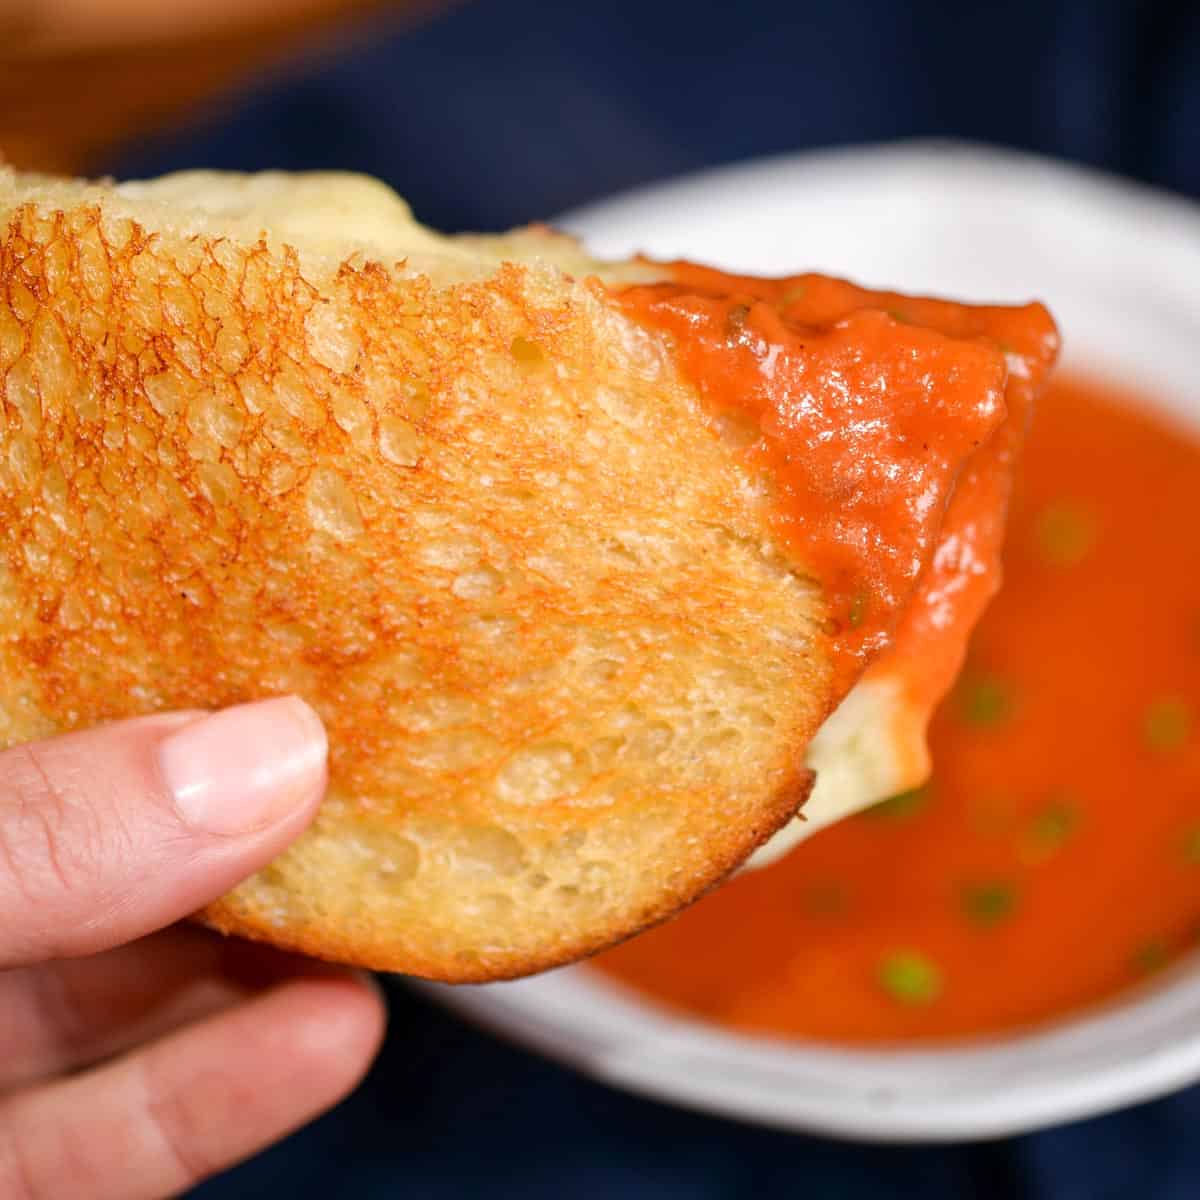 tomato soup with grilled cheese